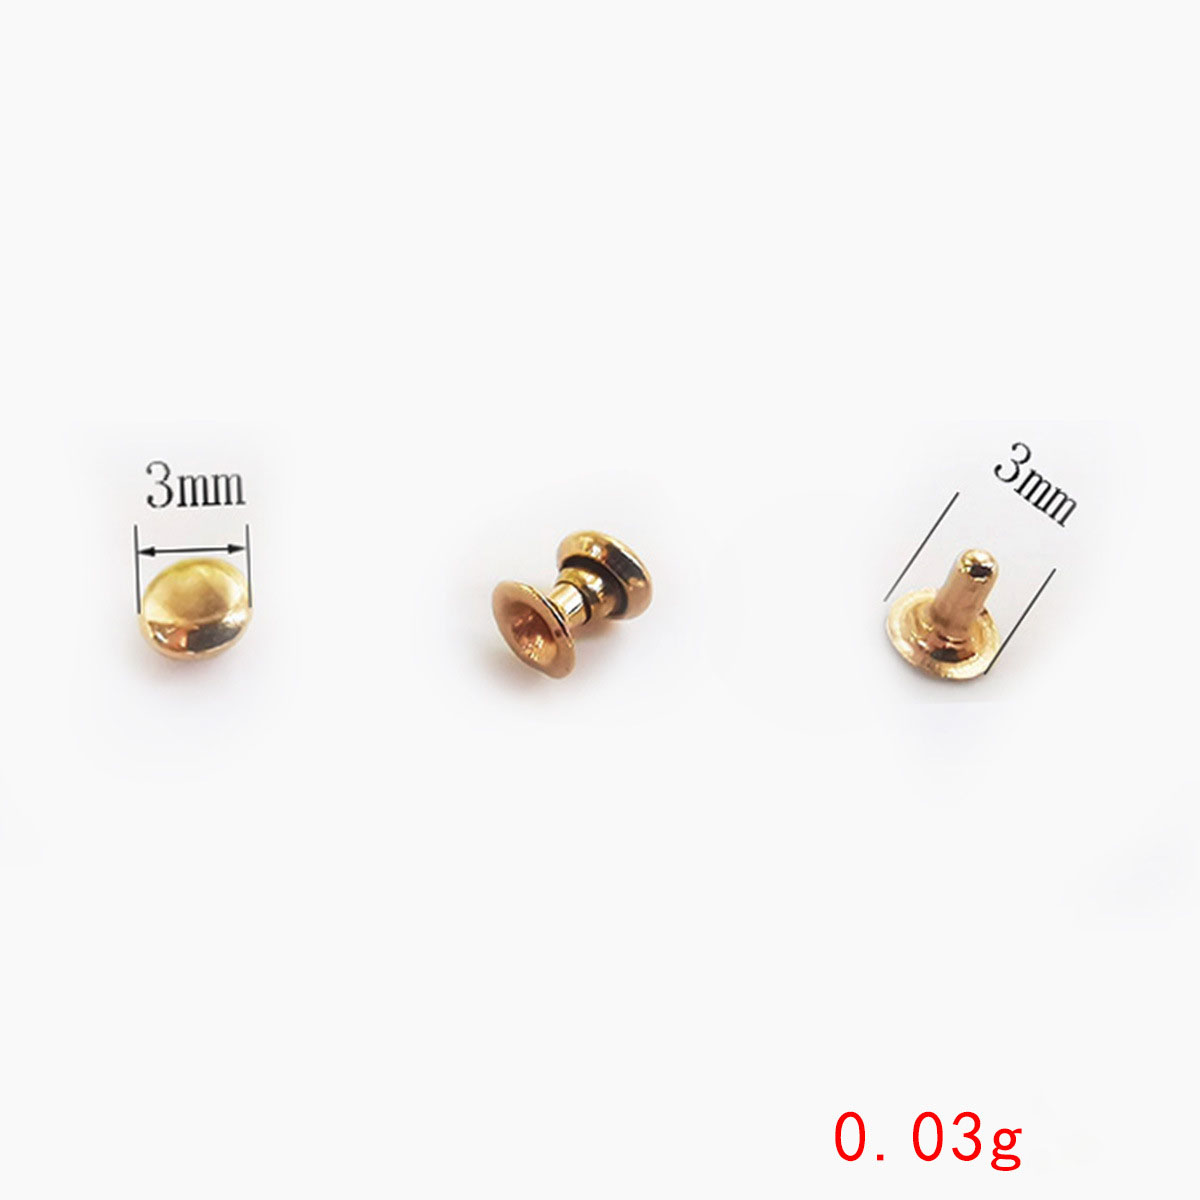 3:3mm gold